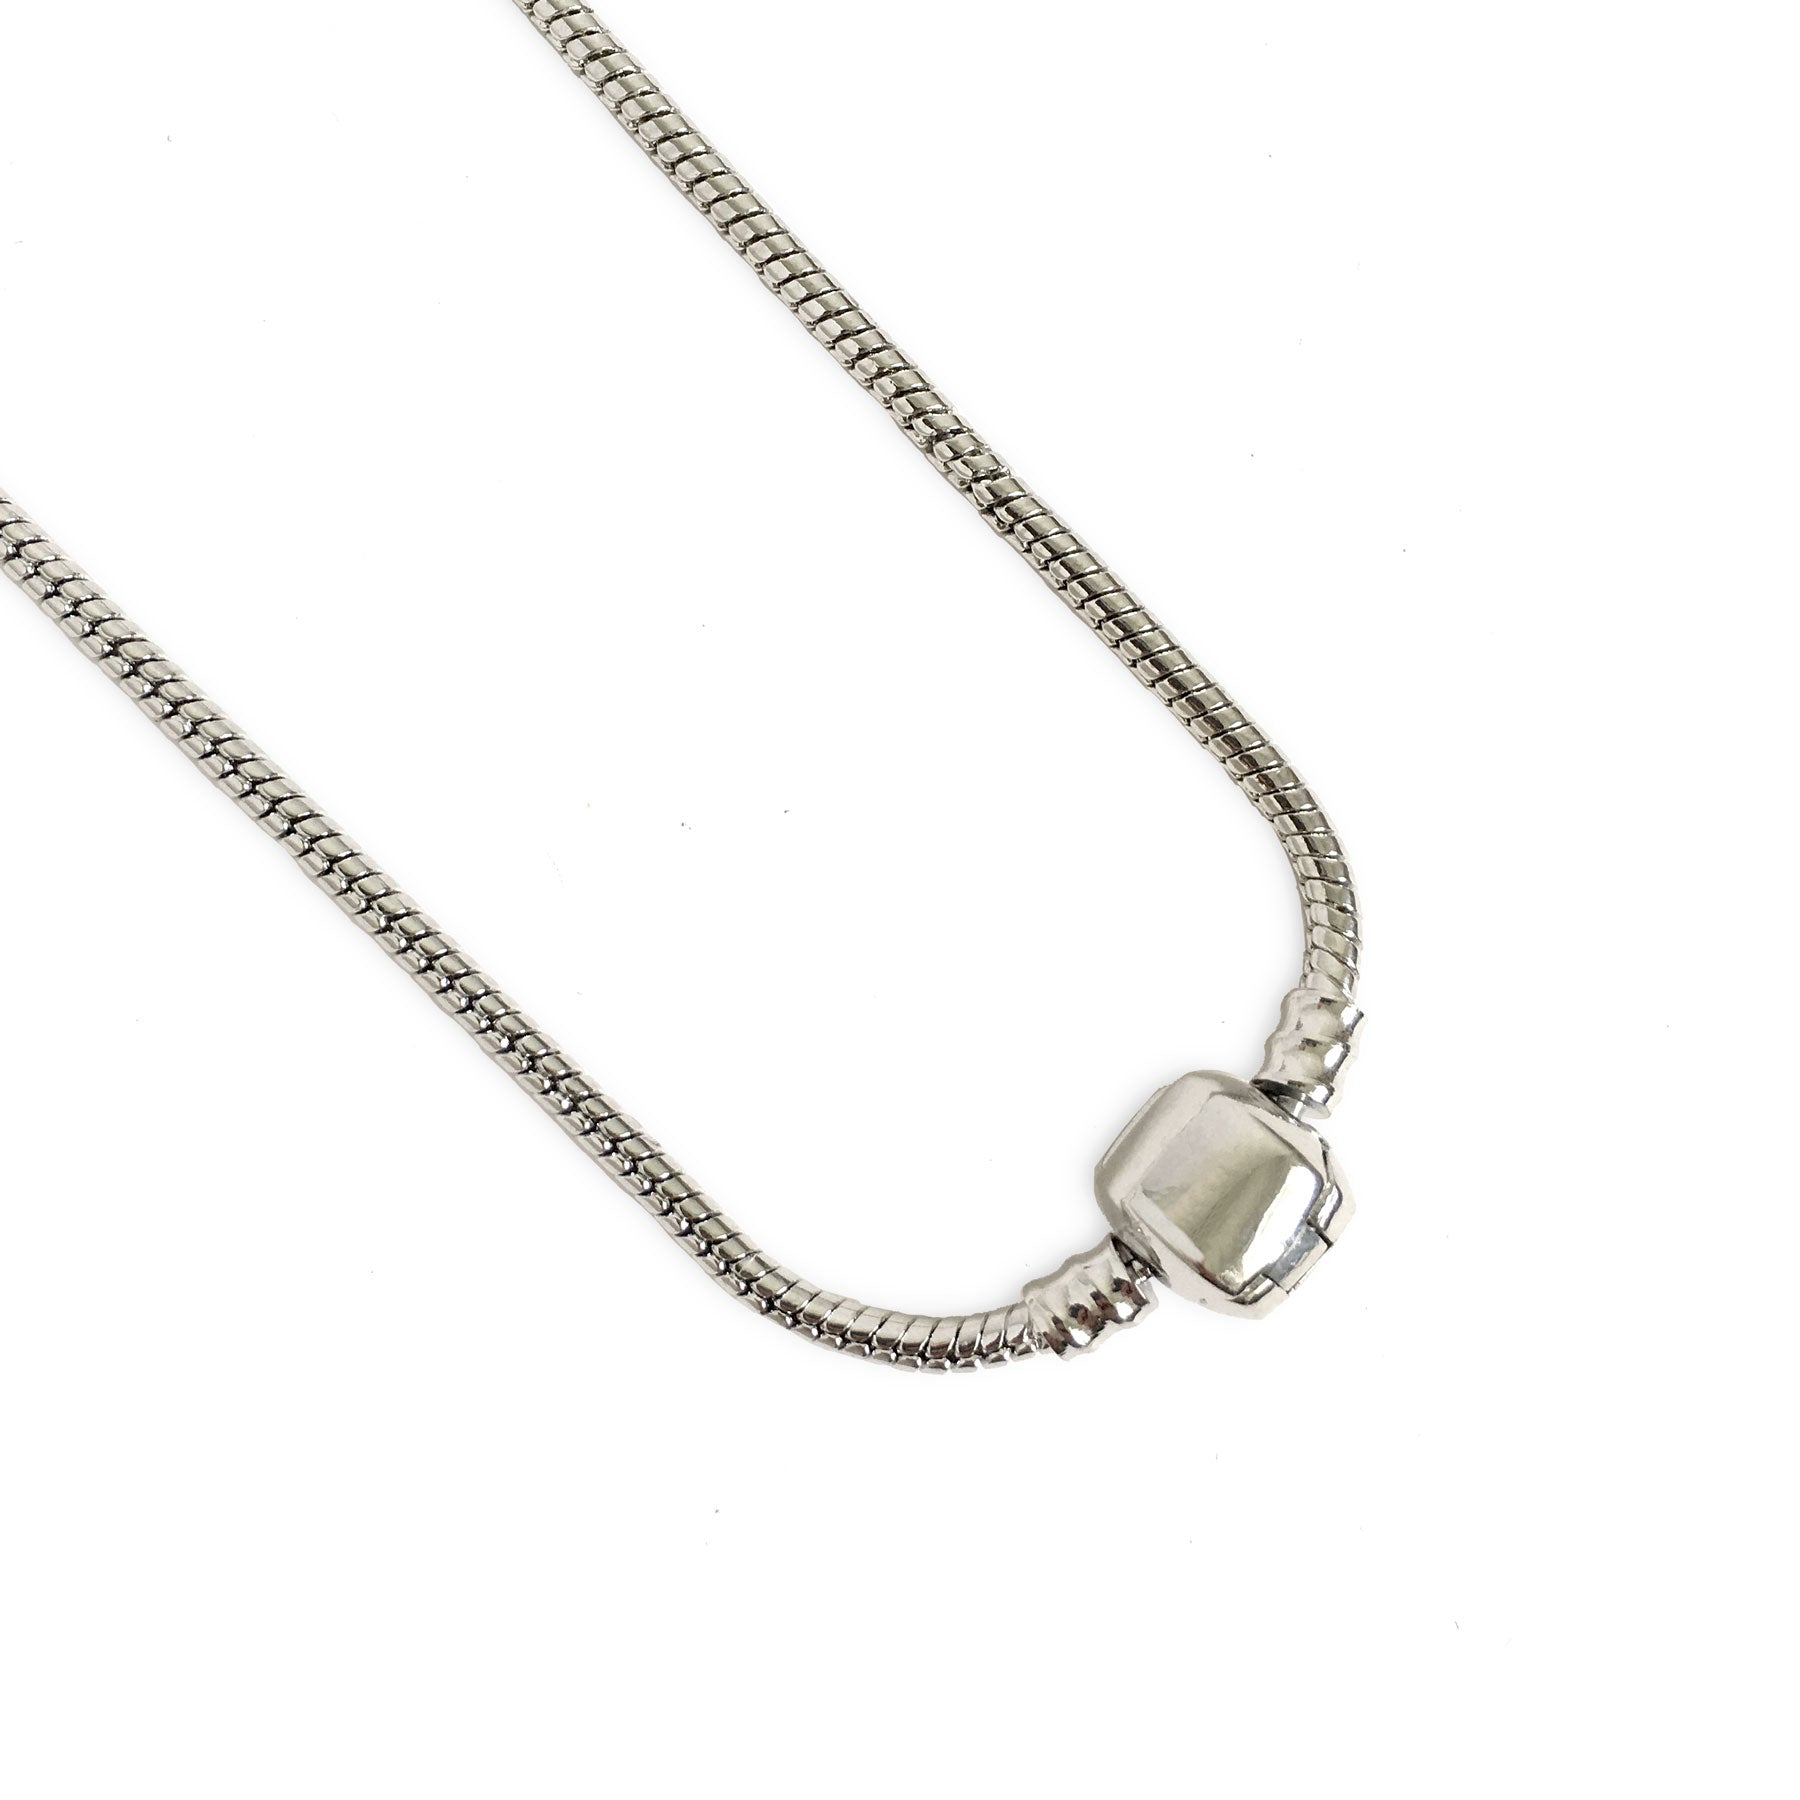 Silver Charm Necklace